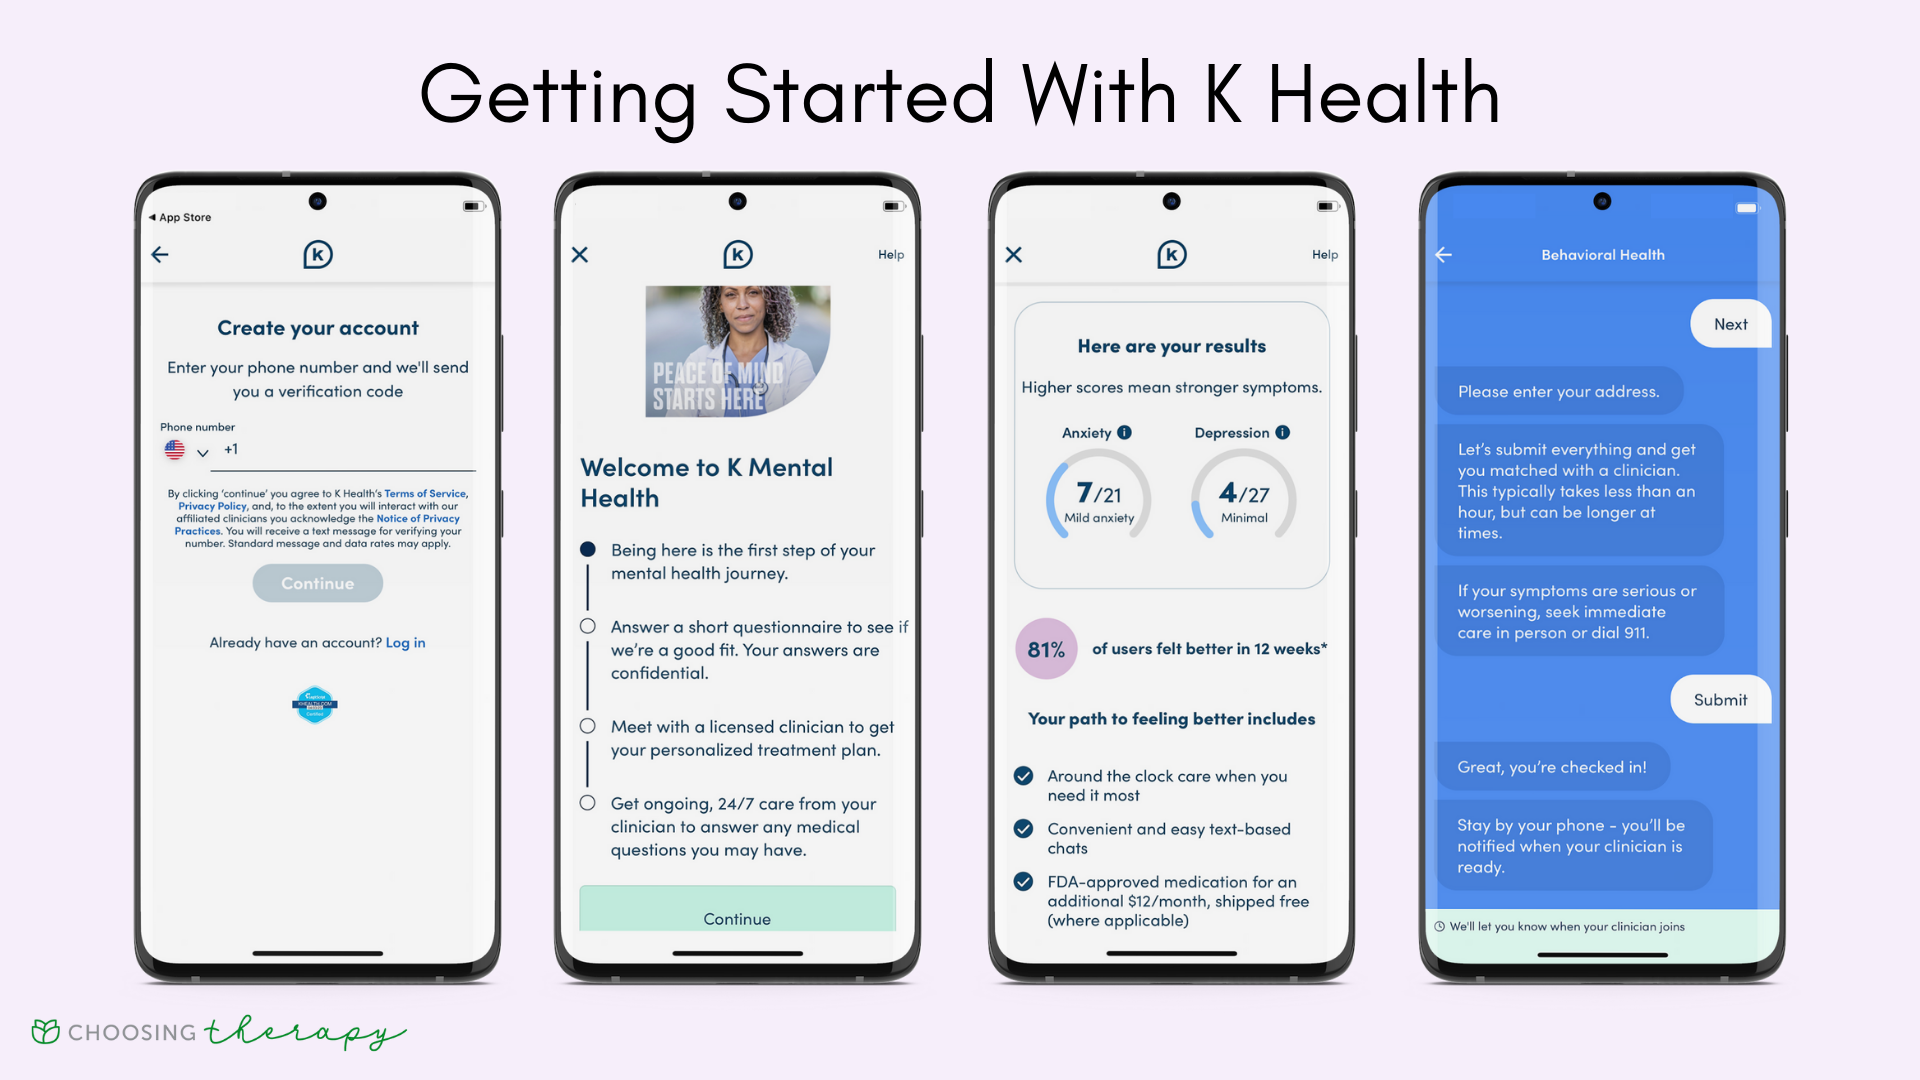 K Health: 24/7 Access to High-Quality Medicine